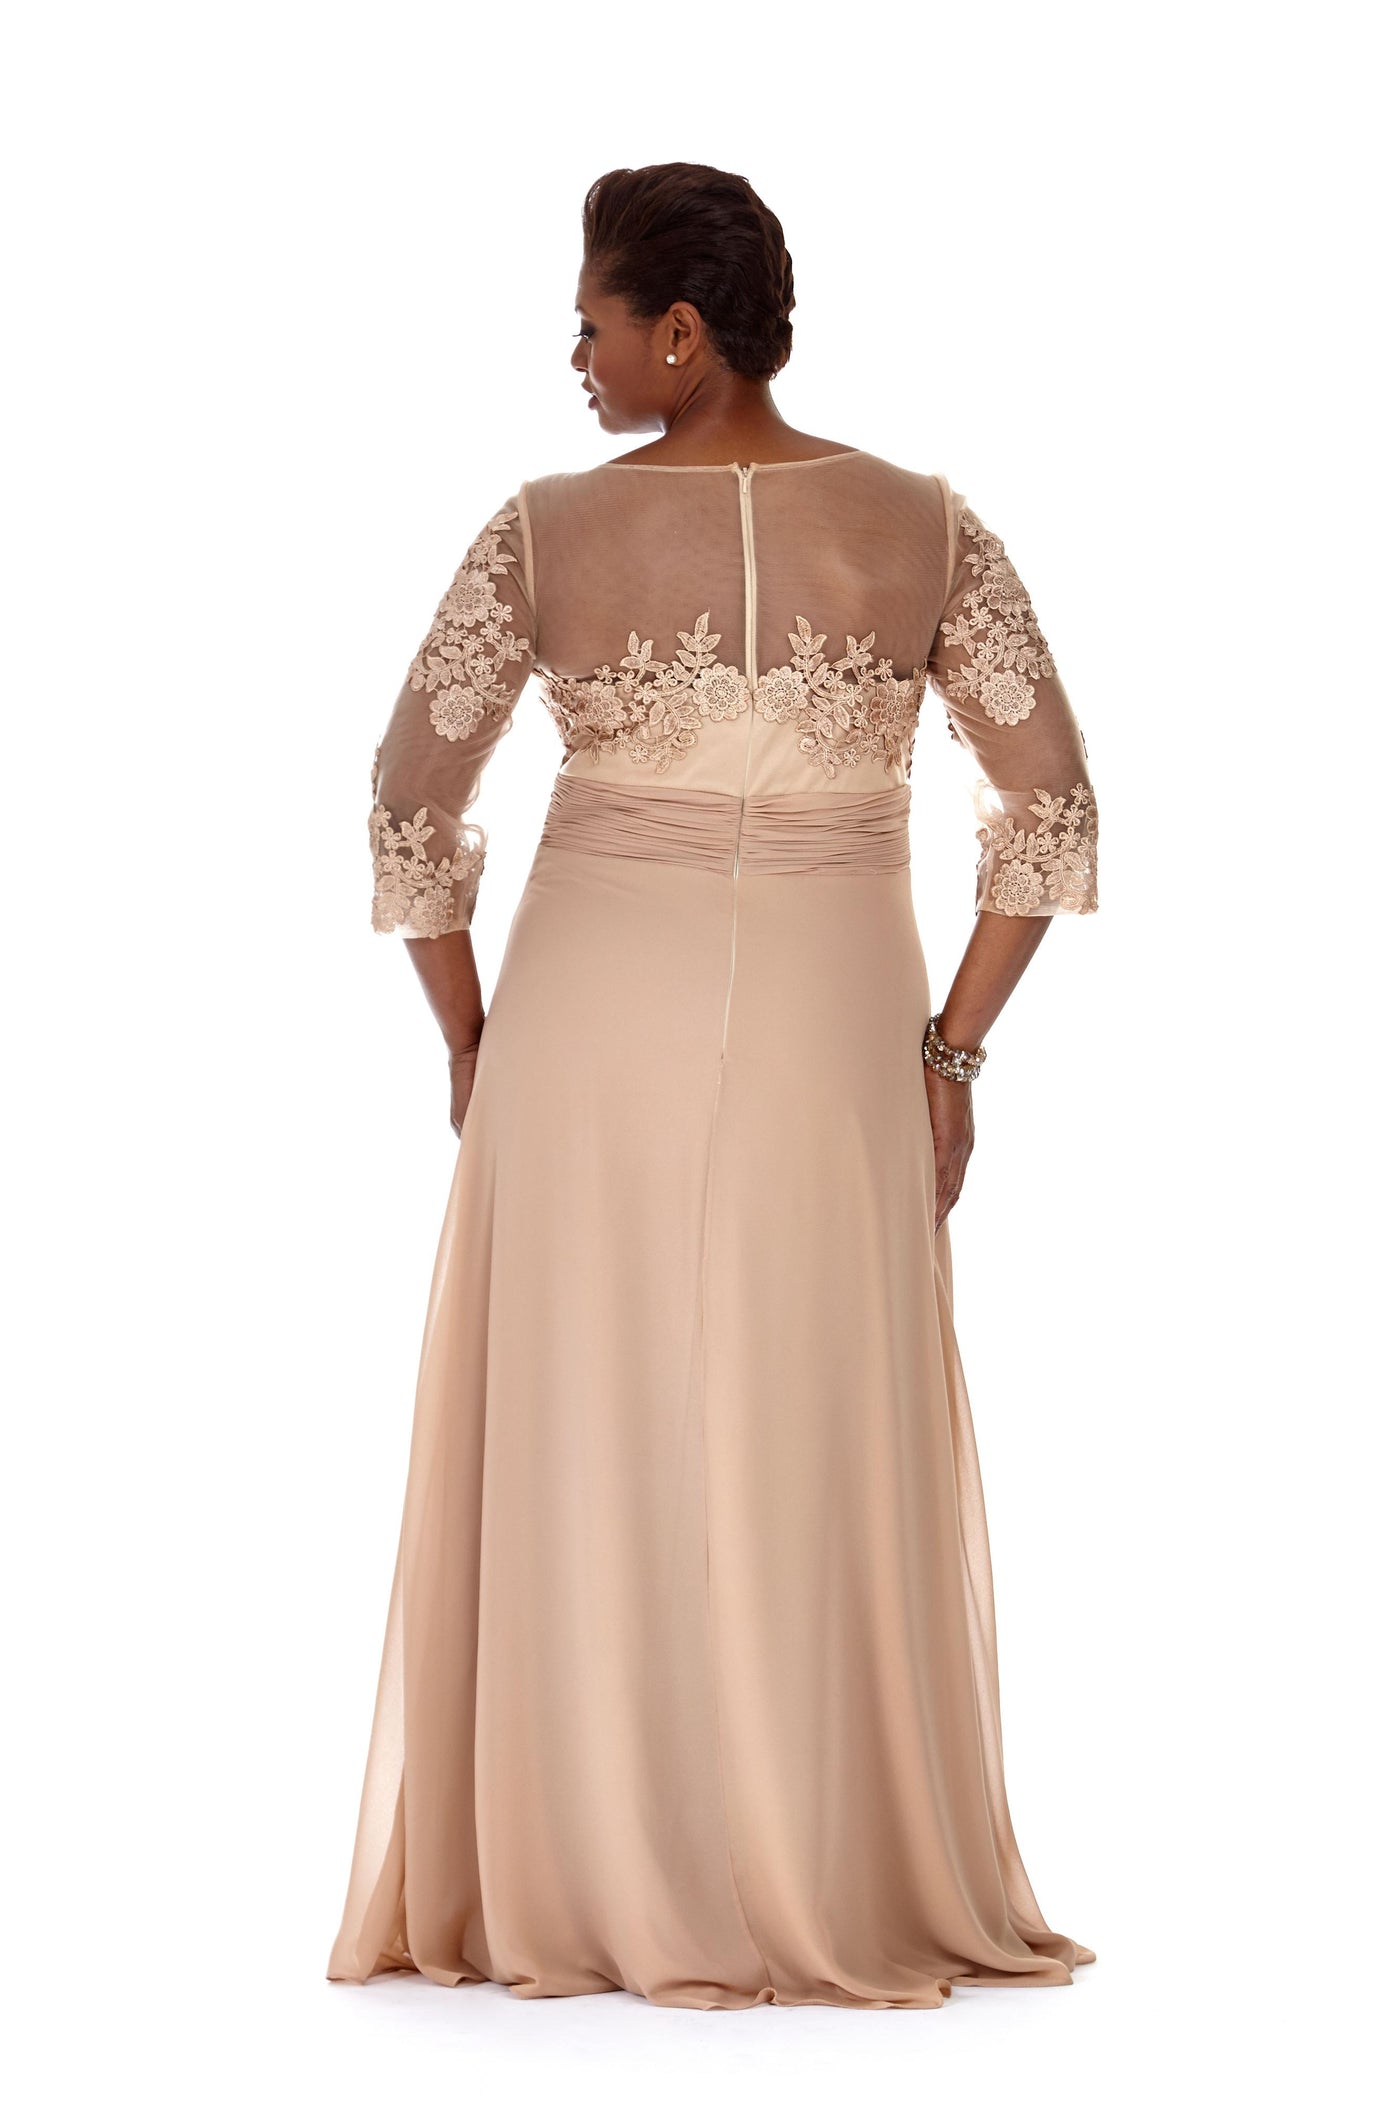 Vintage Style Mother of the Bride Dress by Sydney's Closet - SOLD OUT